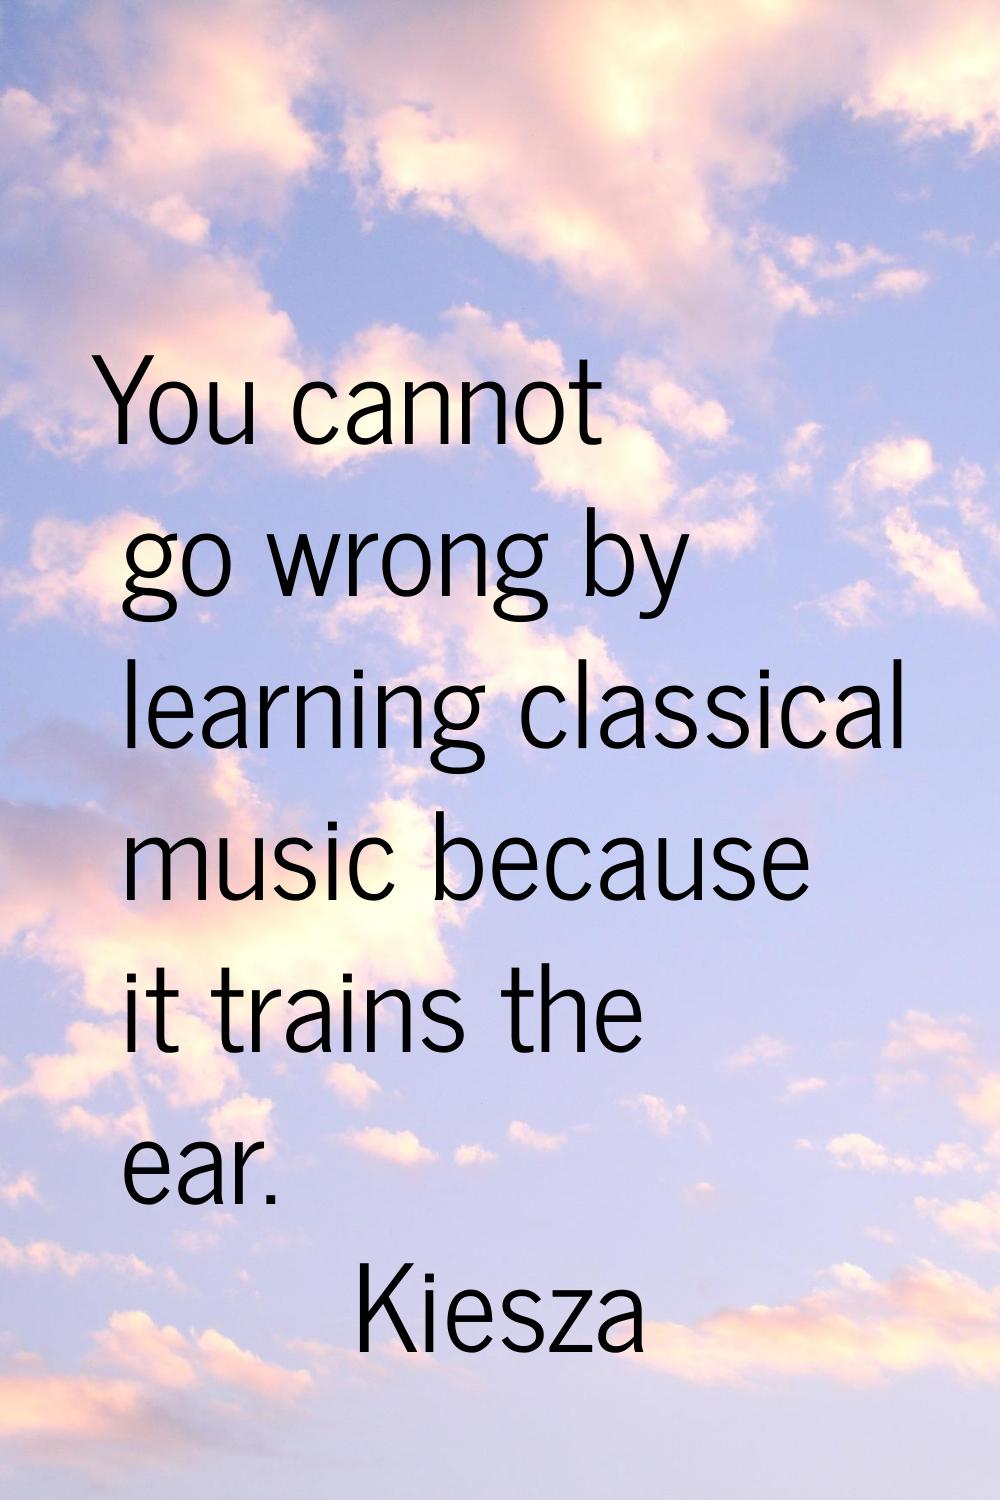 You cannot go wrong by learning classical music because it trains the ear.